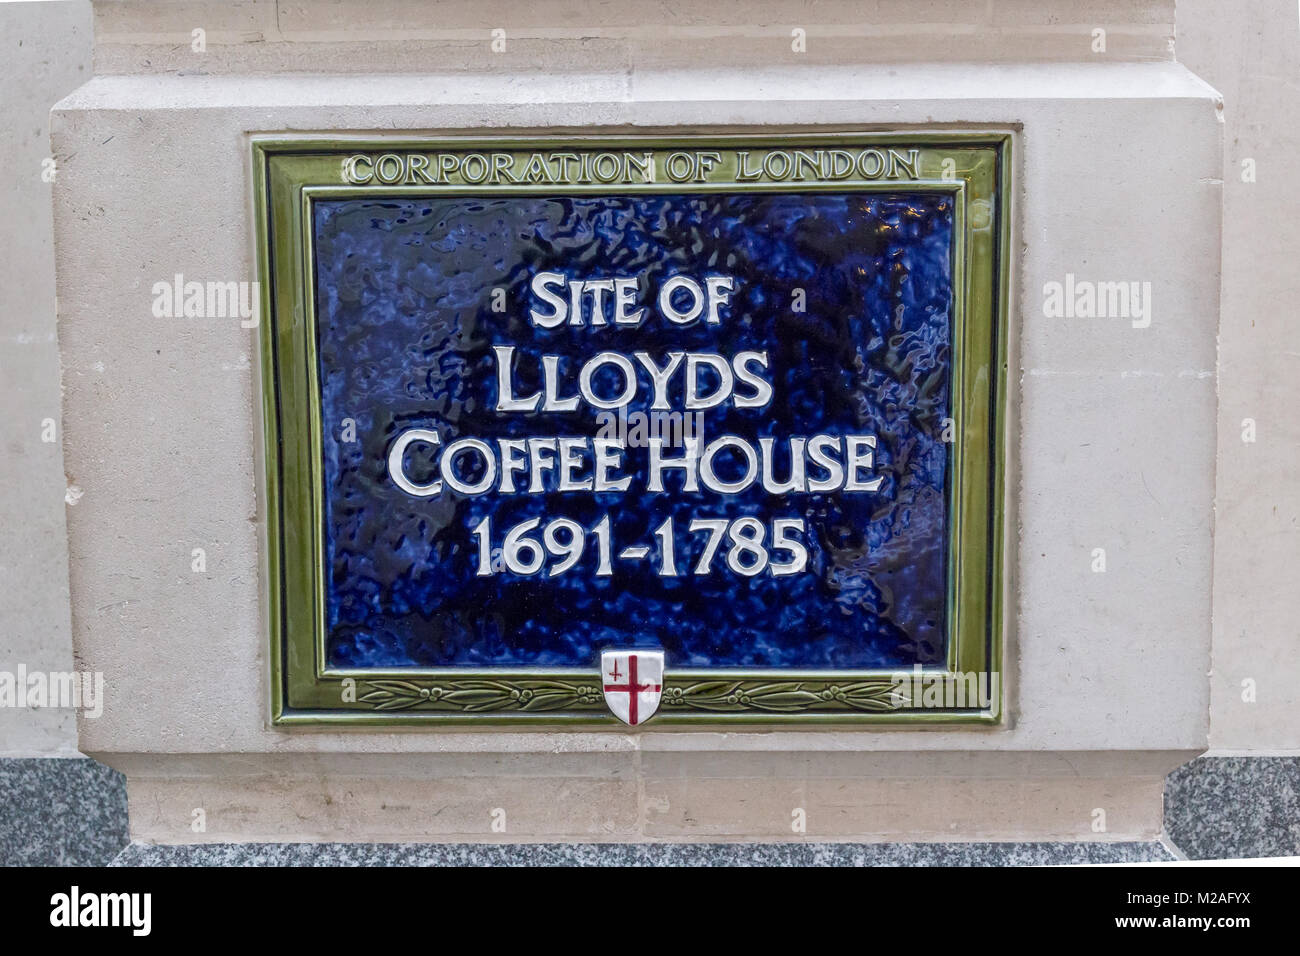 An English heritage blue plaque on Lombard St, London commemorating the location of the former Lloyds Coffee House between 1691 and 1785.  Lombard St  Stock Photo